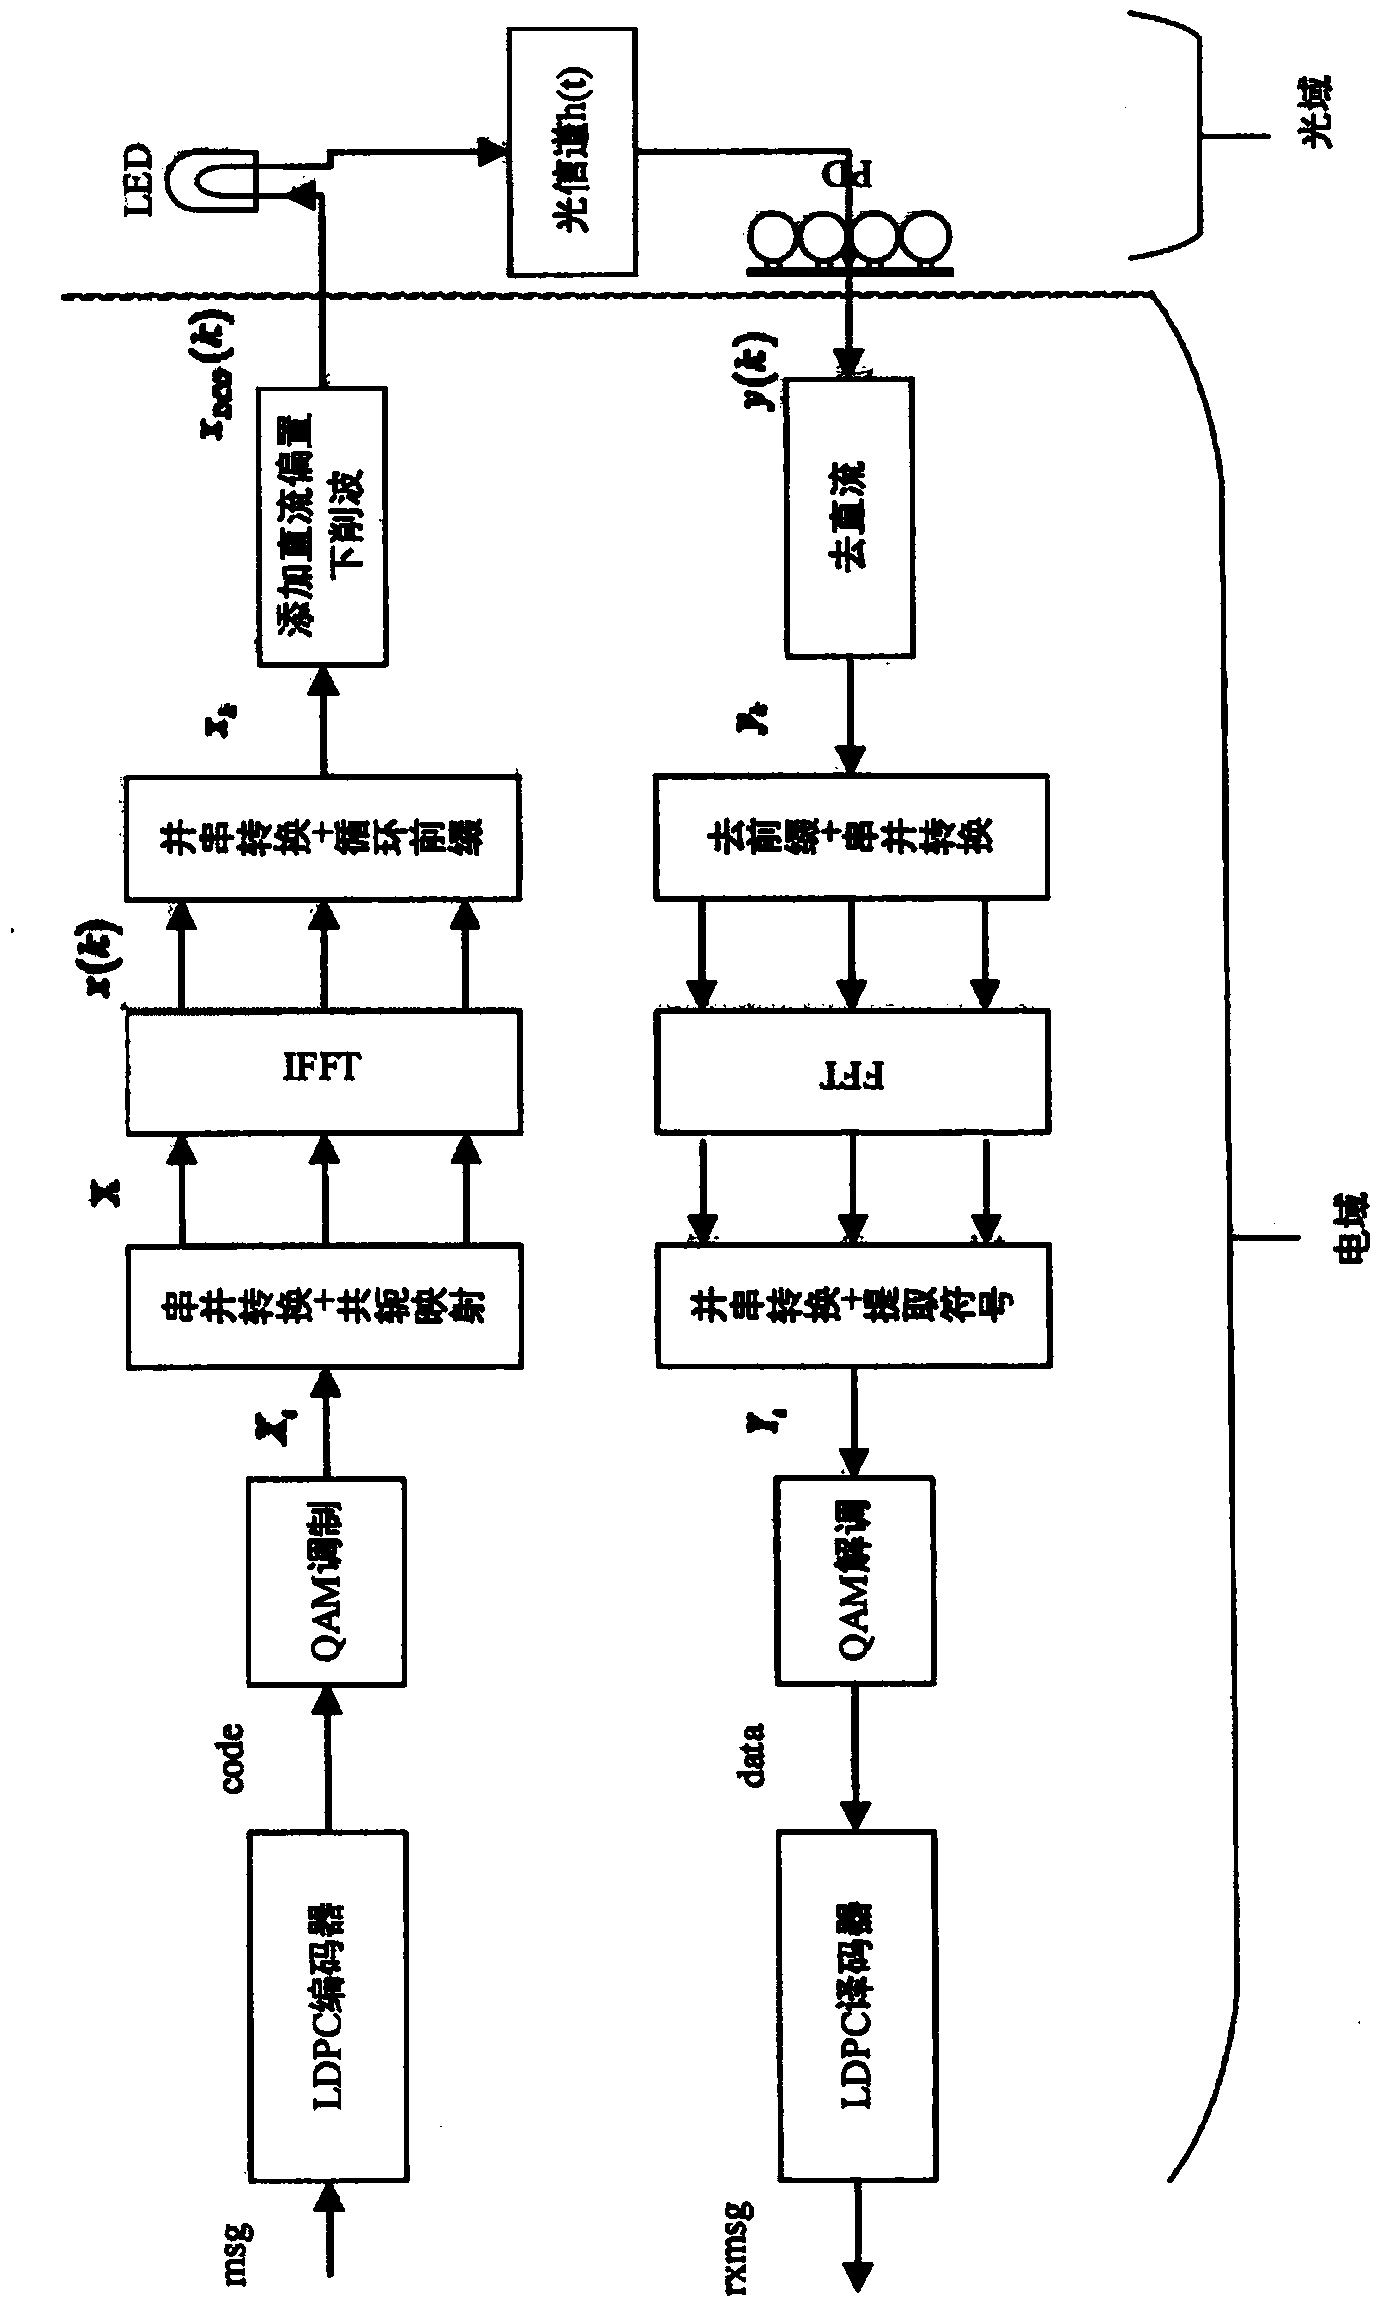 DCO-OFDM system direct current bias setting method applicable to visible light communication